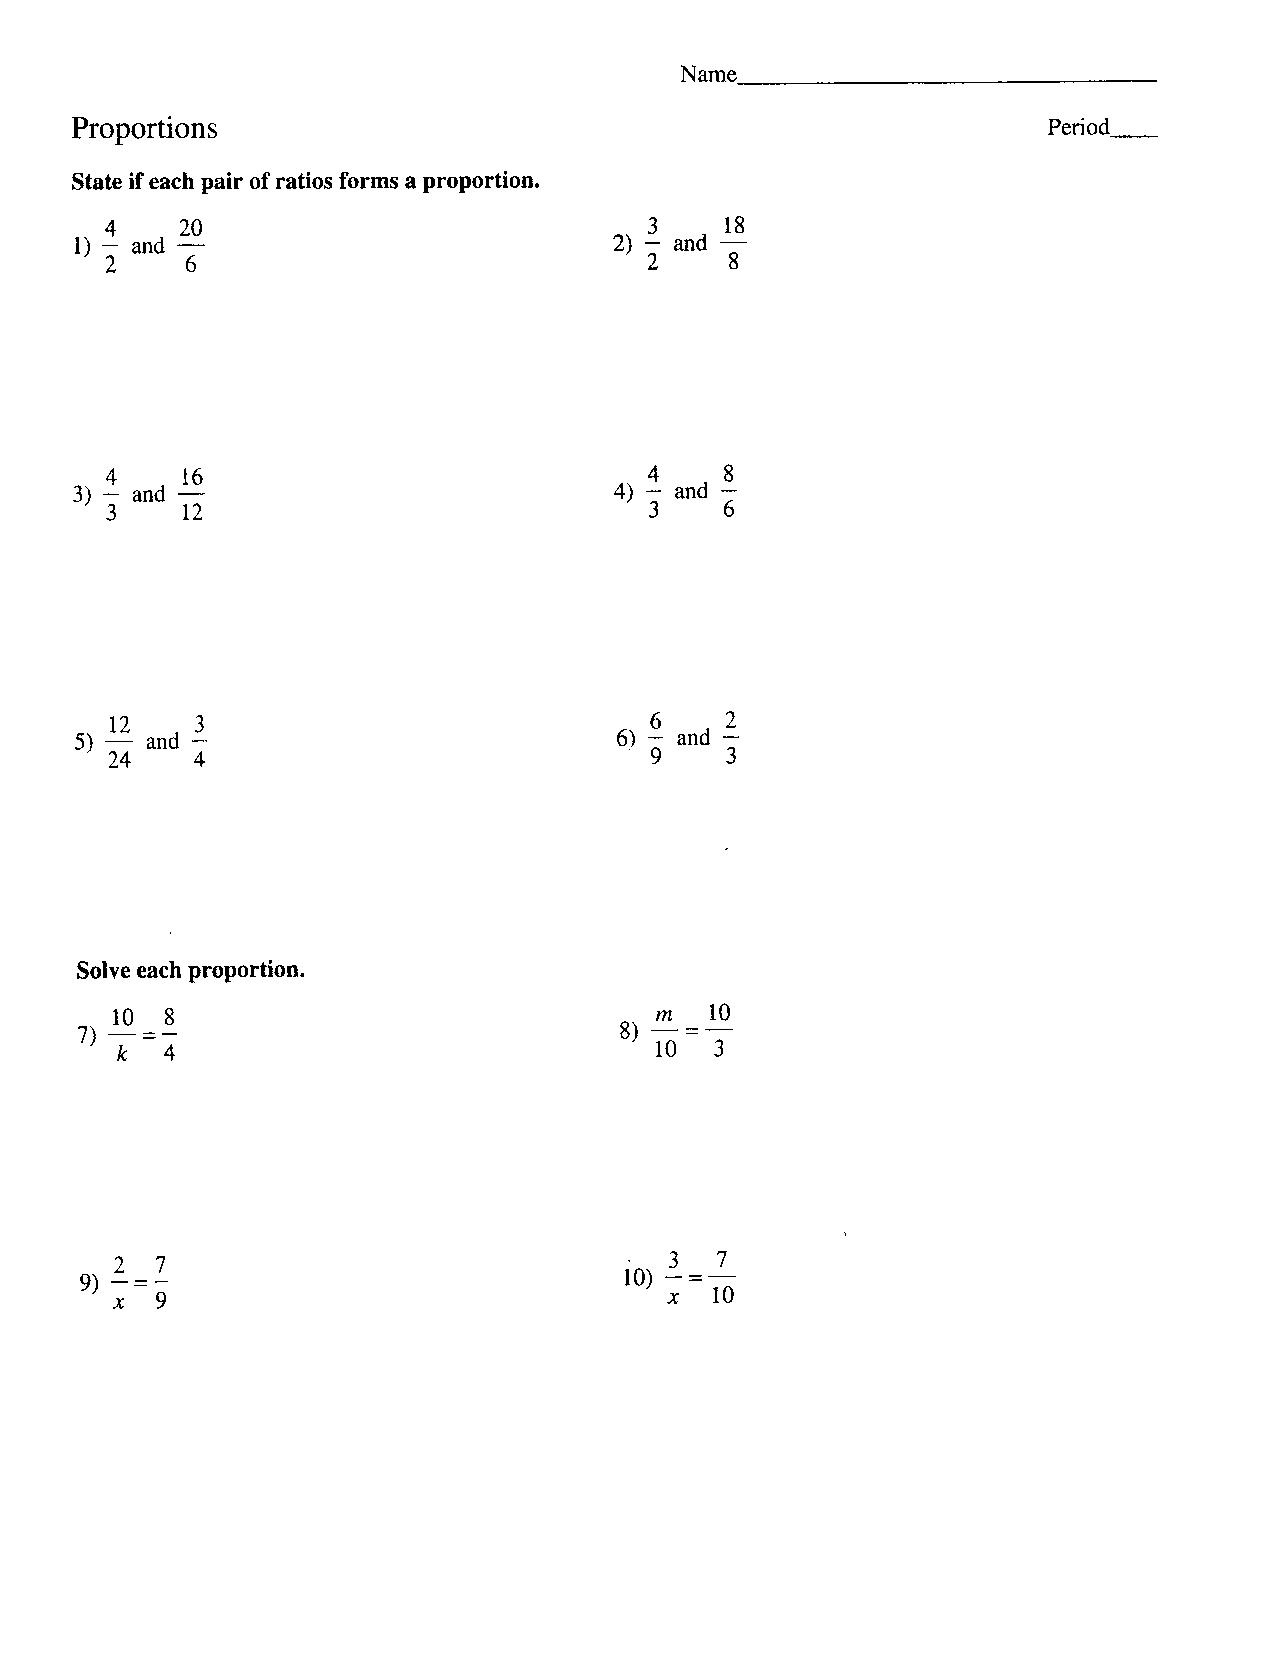 Solving Ratios and Proportions Worksheets Image